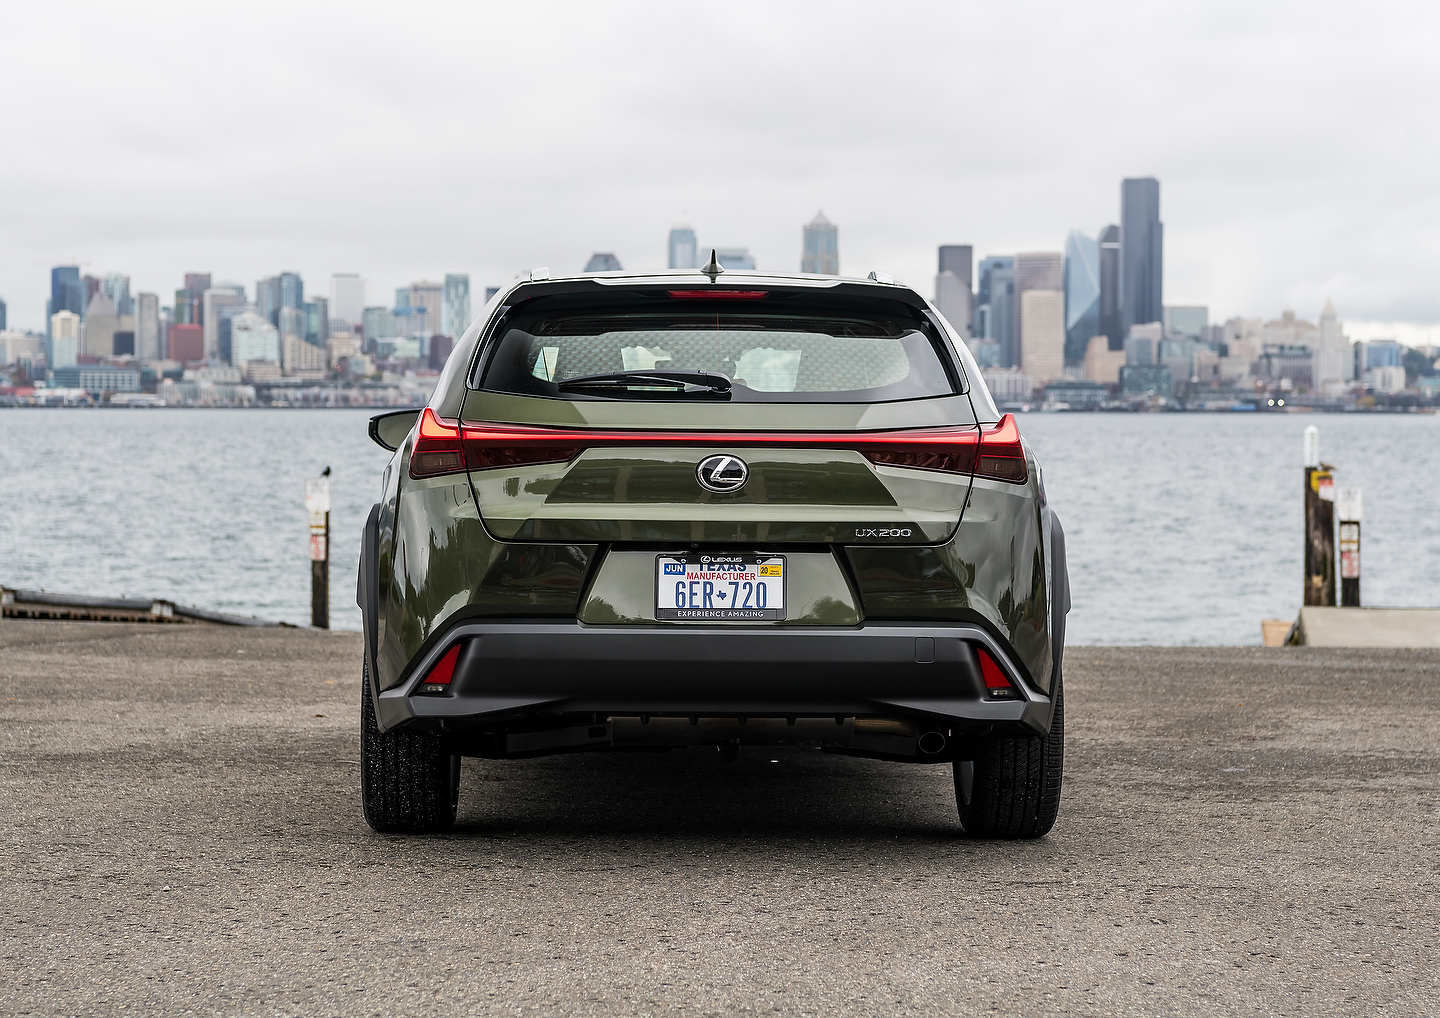 A look at the 2021 Lexus luxury SUV lineup